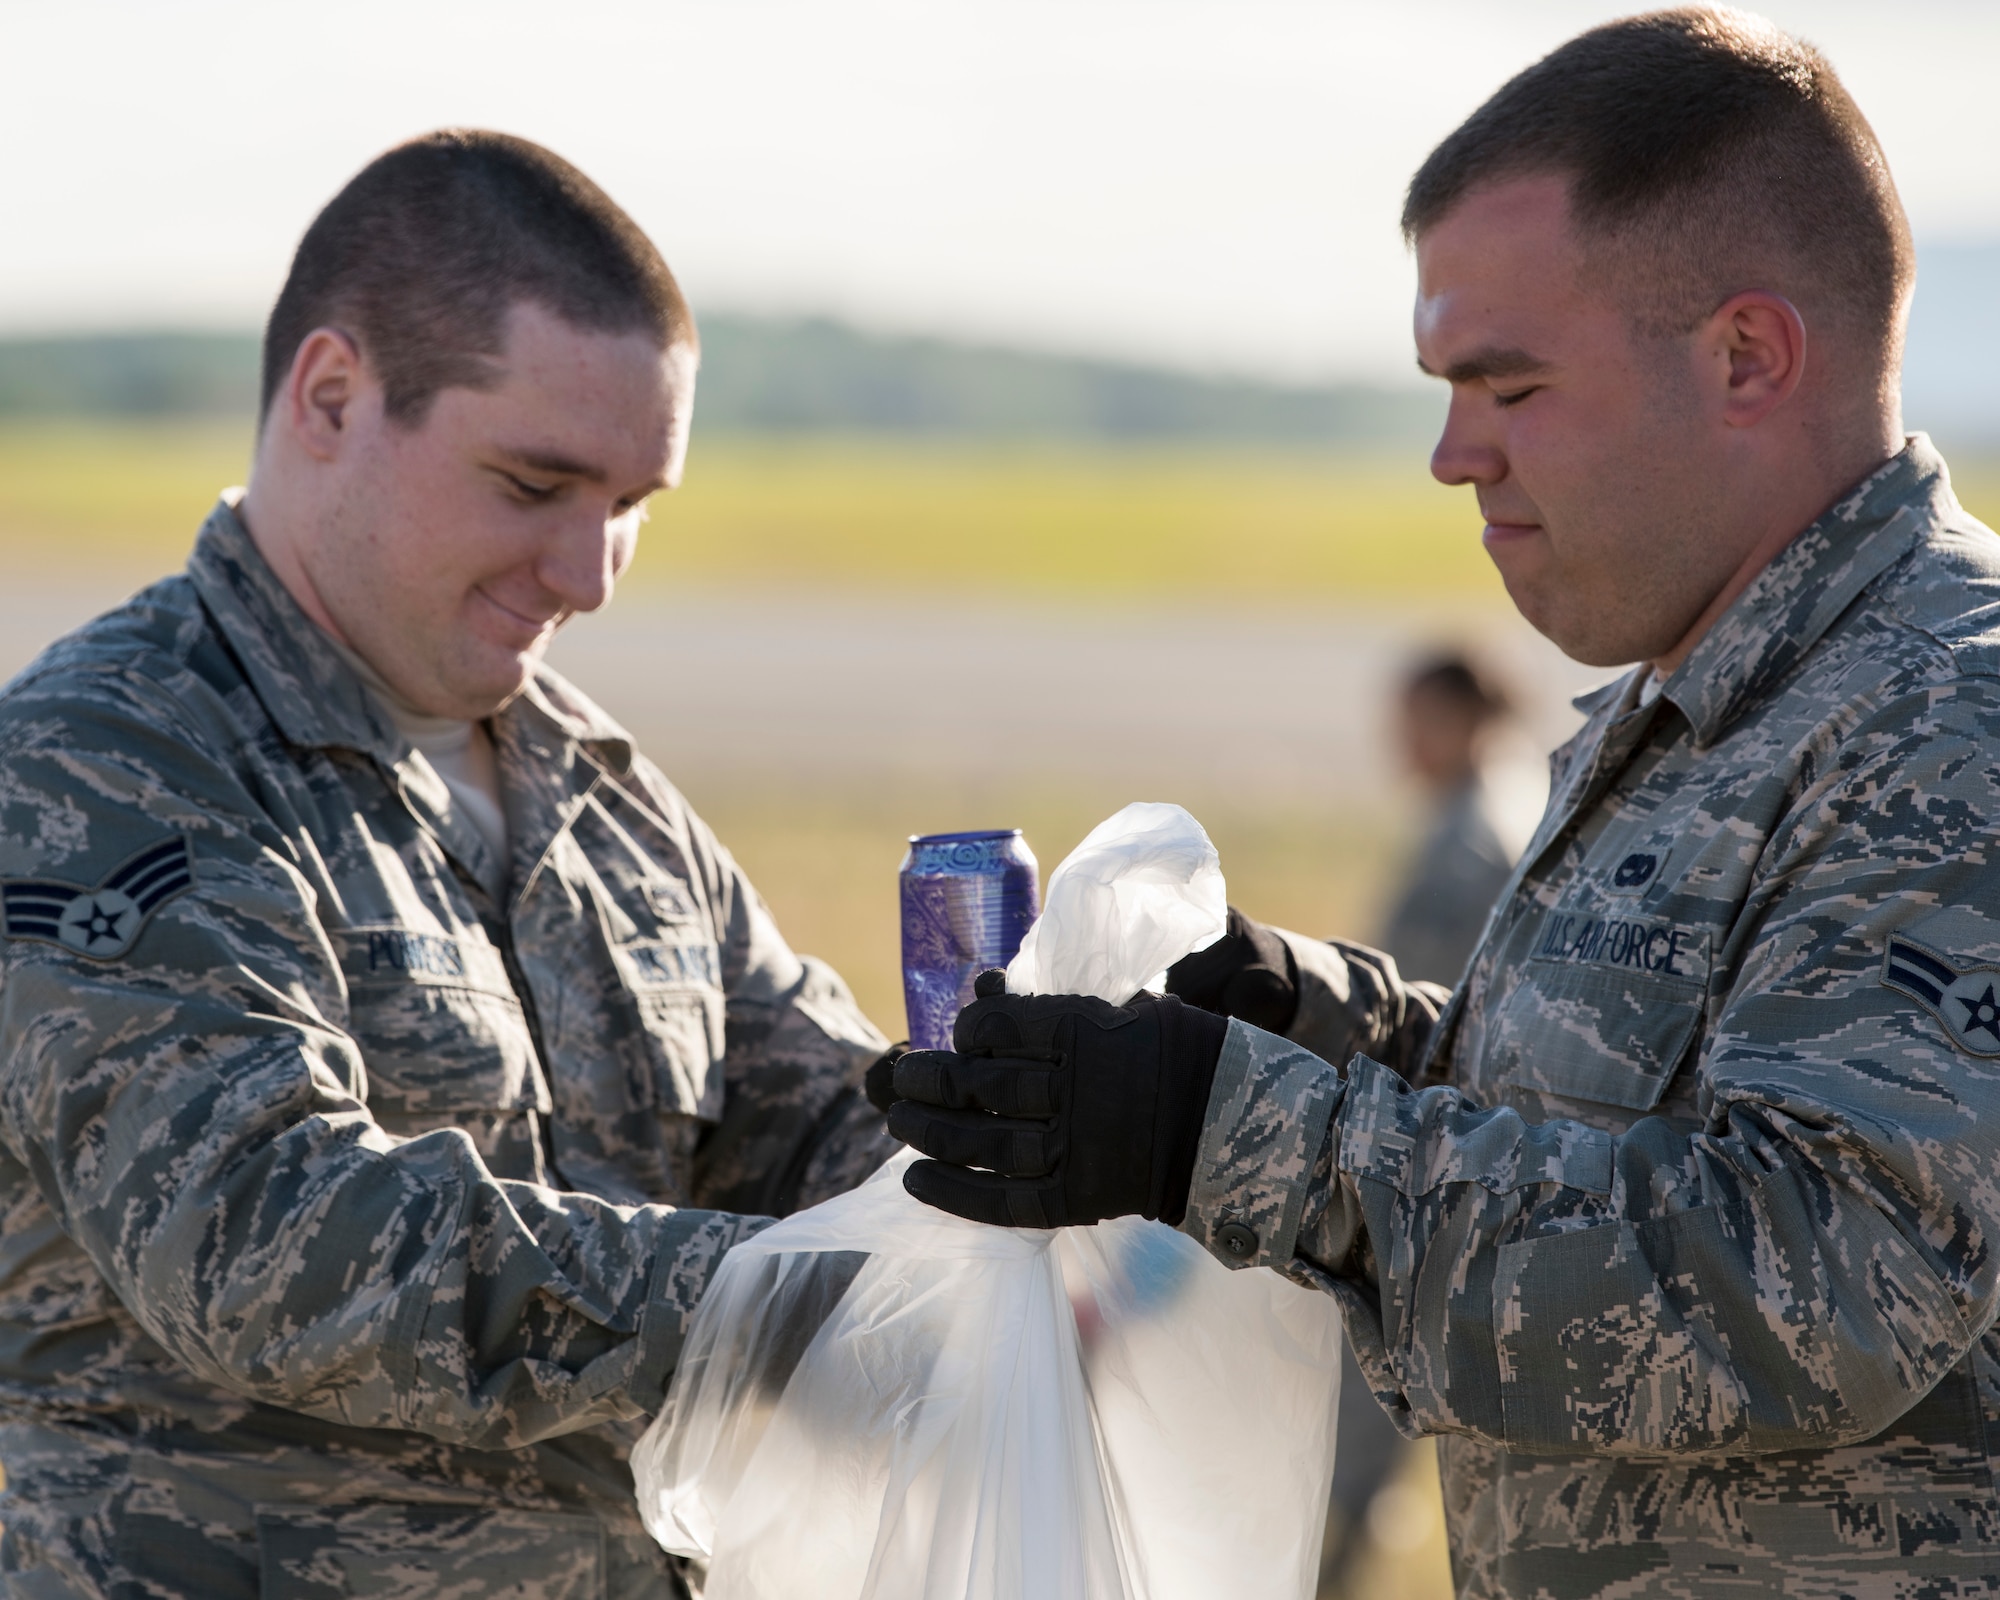 Senior Airman Cody Powers and Airman 1st Class Tyler Parnell, both 3rd Munitions Squadron muntions systems crew chiefs, pick up trash during a foreign object and debris walk at Joint Base Elmendorf-Richardson, Alaska, July 2, 2018. The JBER Airmen conducted the FOD walk after the Arctic Thunder Open House to remove debris that could damage aircraft and hinder mission readiness.